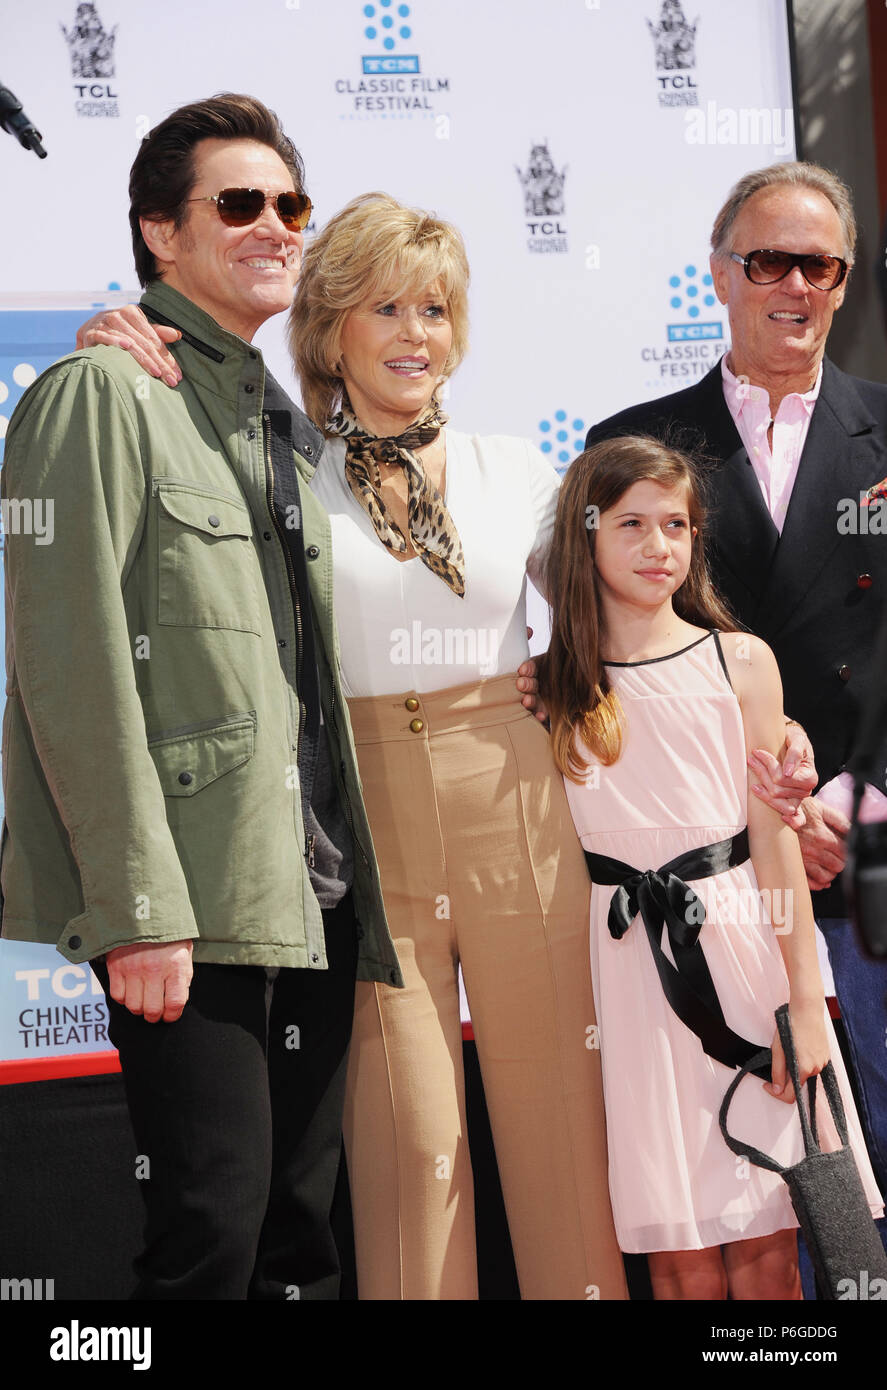 Jane Fonda, Jim Carrey, Peter Fonda and Viva Vadim  at the ceremony honoring Jane Fonda with the  Hand and Footprint at the TLC Chinese Theatre In Los Angeles.Jane Fonda, Jim Carrey, Peter Fonda and Viva Vadim   Event in Hollywood Life - California, Red Carpet Event, USA, Film Industry, Celebrities, Photography, Bestof, Arts Culture and Entertainment, Topix Celebrities fashion, Best of, Hollywood Life, Event in Hollywood Life - California, movie celebrities, TV celebrities, Music celebrities, Topix, Bestof, Arts Culture and Entertainment, Photography,    inquiry tsuni@Gamma-USA.com , Credit Ts Stock Photo